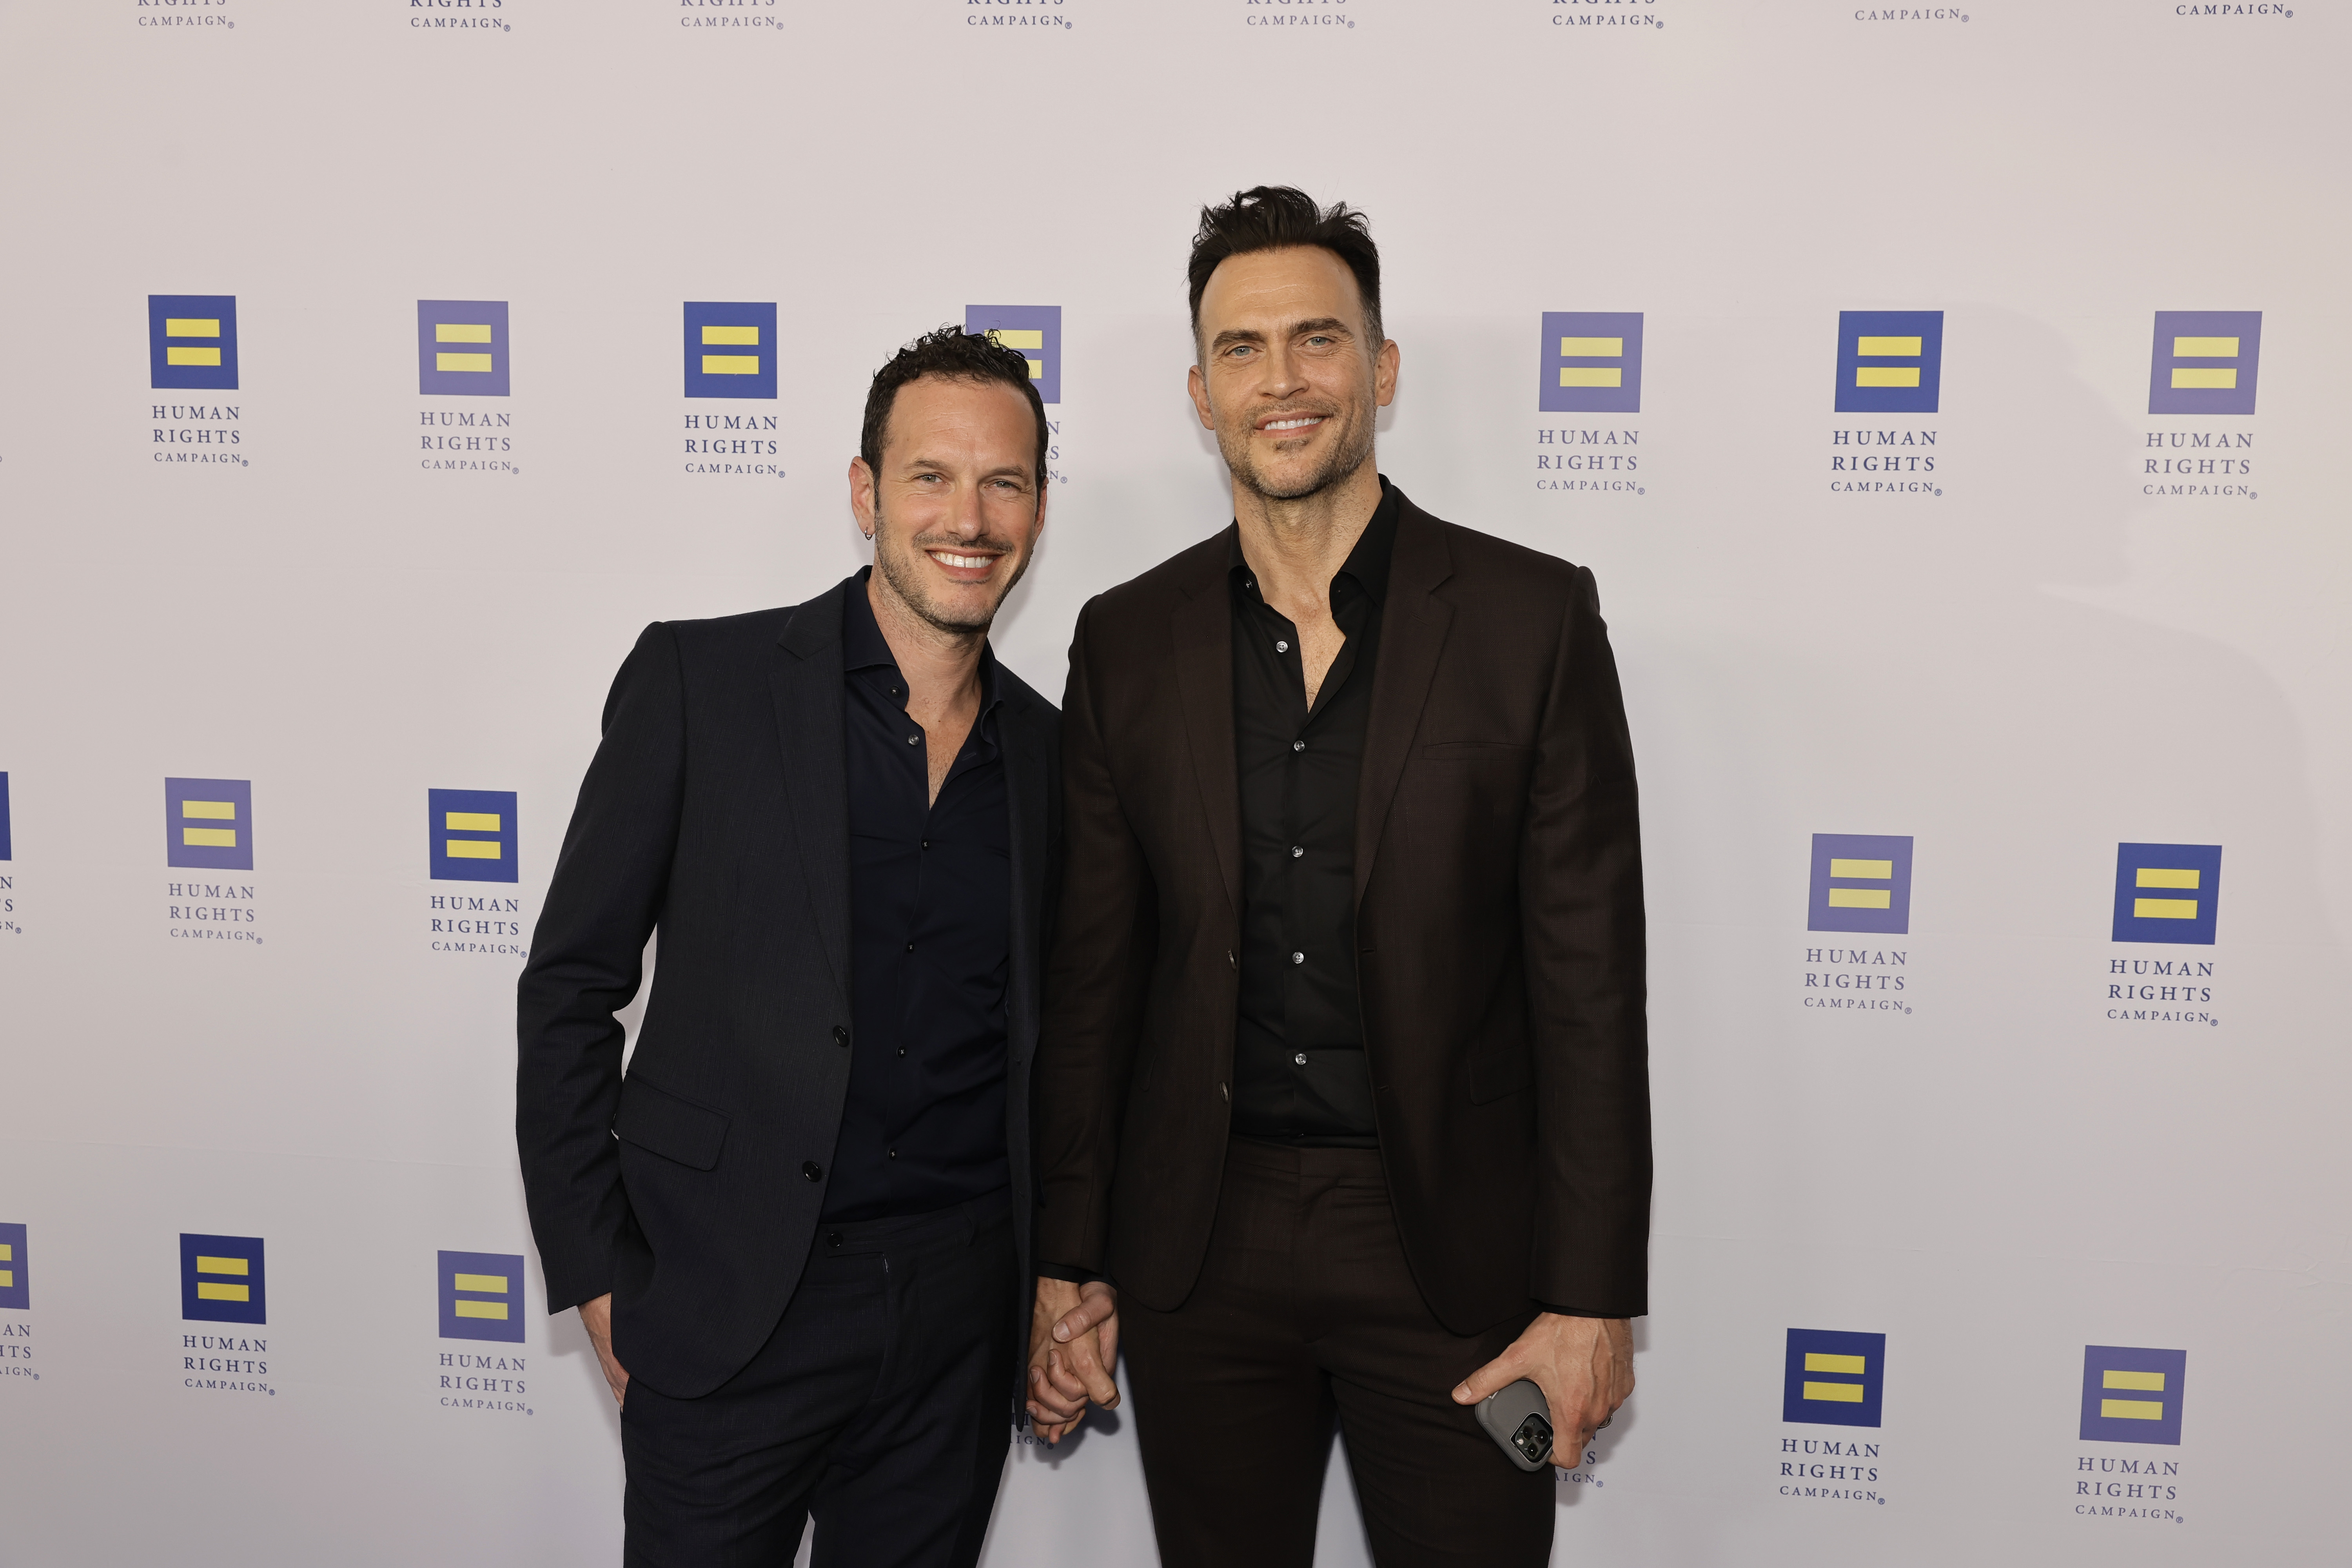 Jason Landau and Cheyenne Jackson at the Human Rights Campaign Dinner on March 25, 2023, in Los Angeles, California. | Source: Getty Images